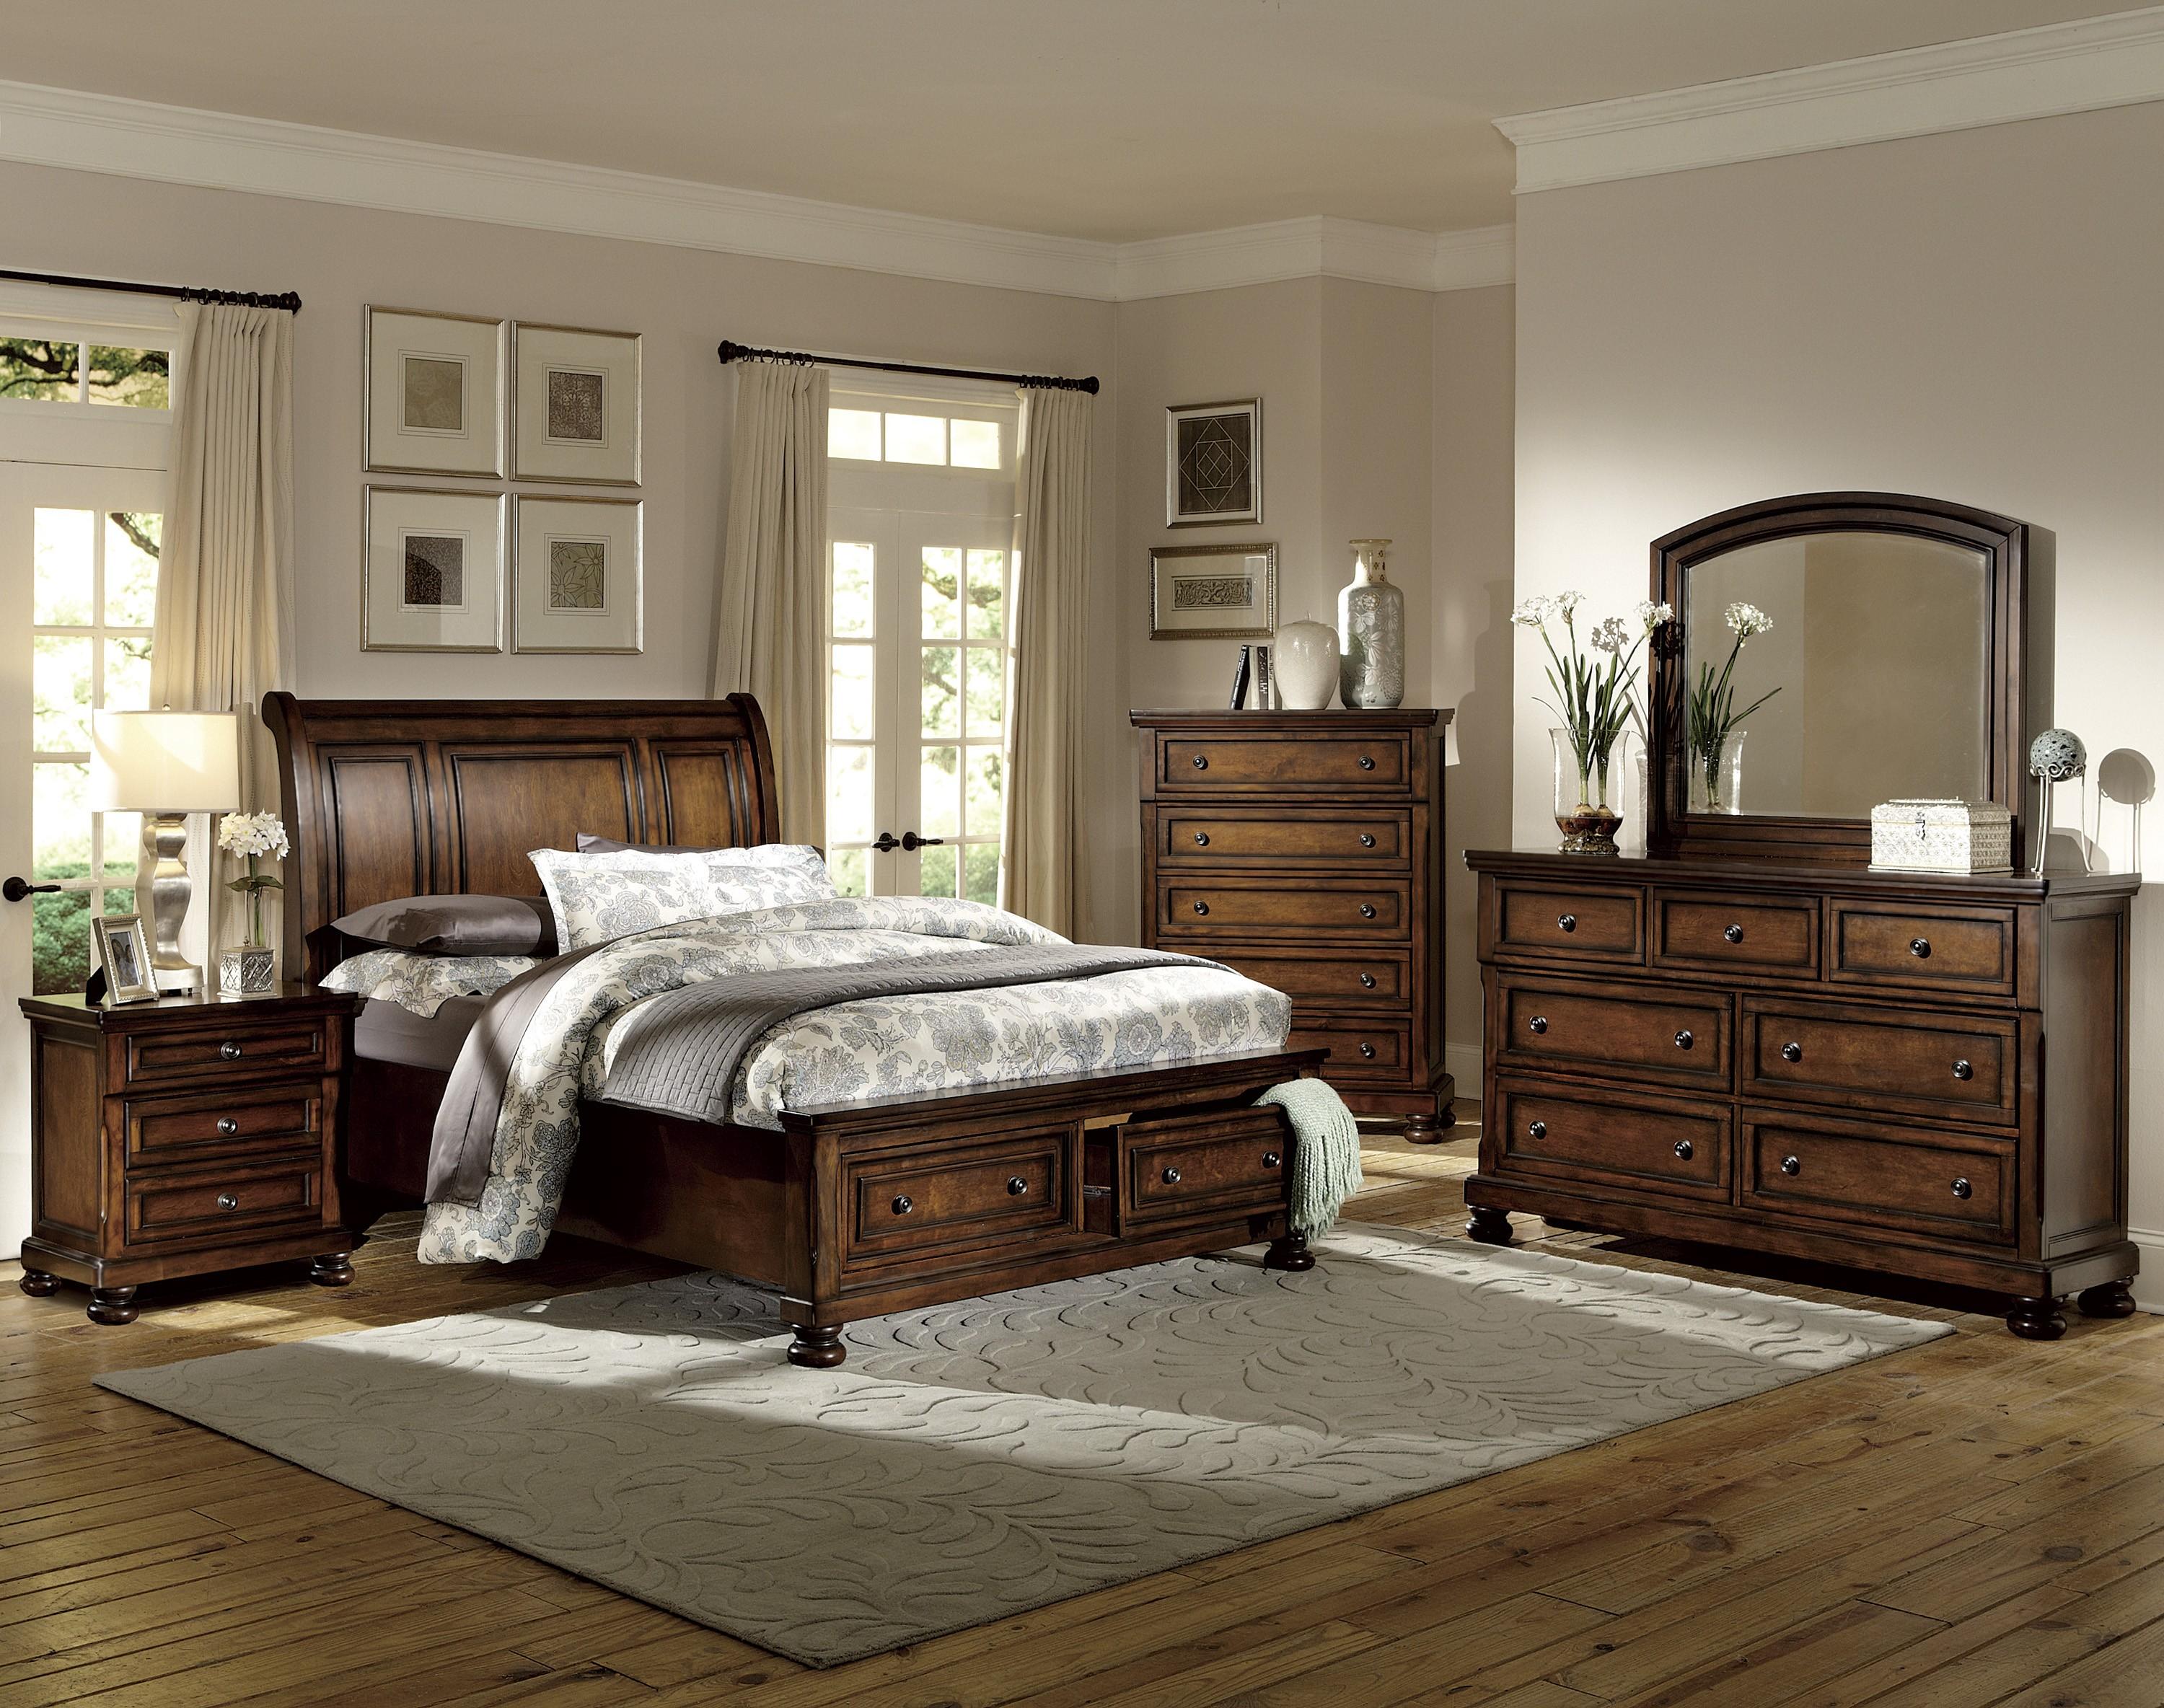 Traditional Bedroom Set 2159-1-5PC Cumberland 2159-1-5PC in Cherry 